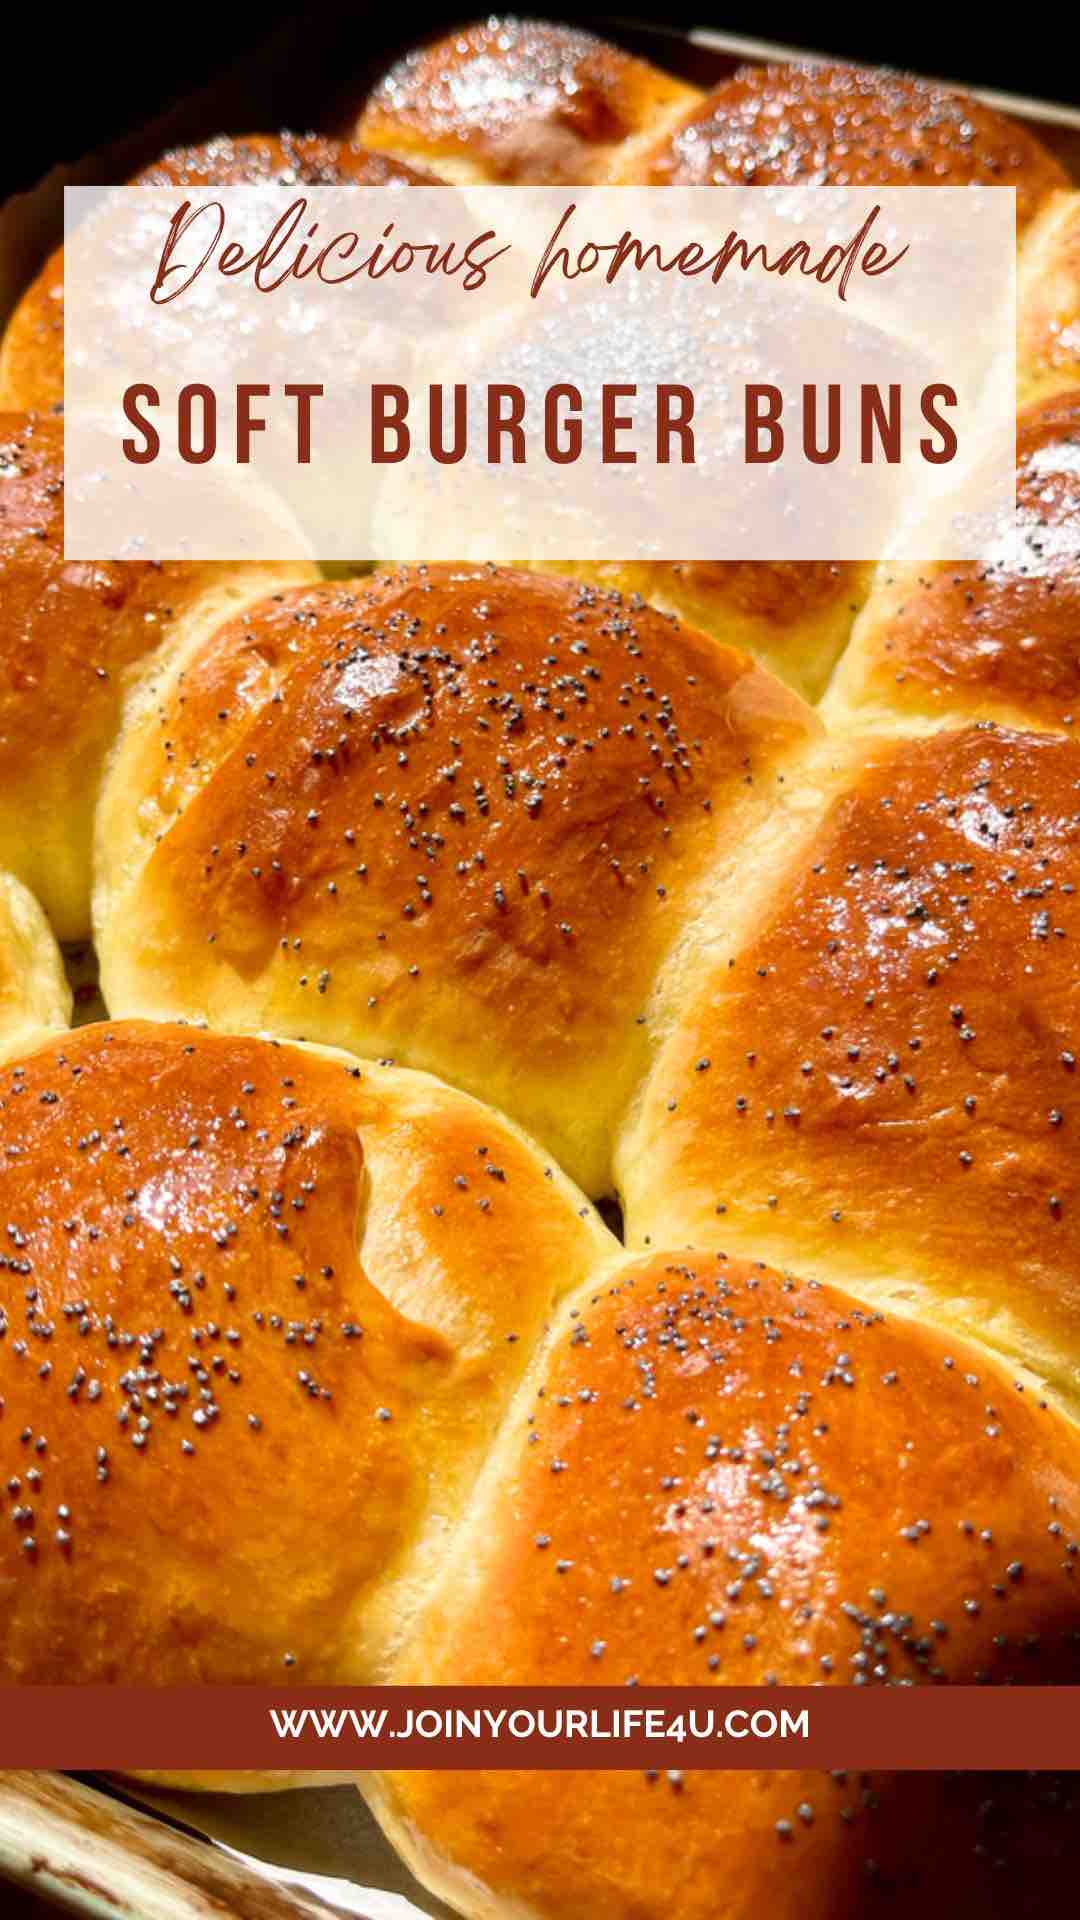 Freshly baked golden brown burger buns cooling in a pan